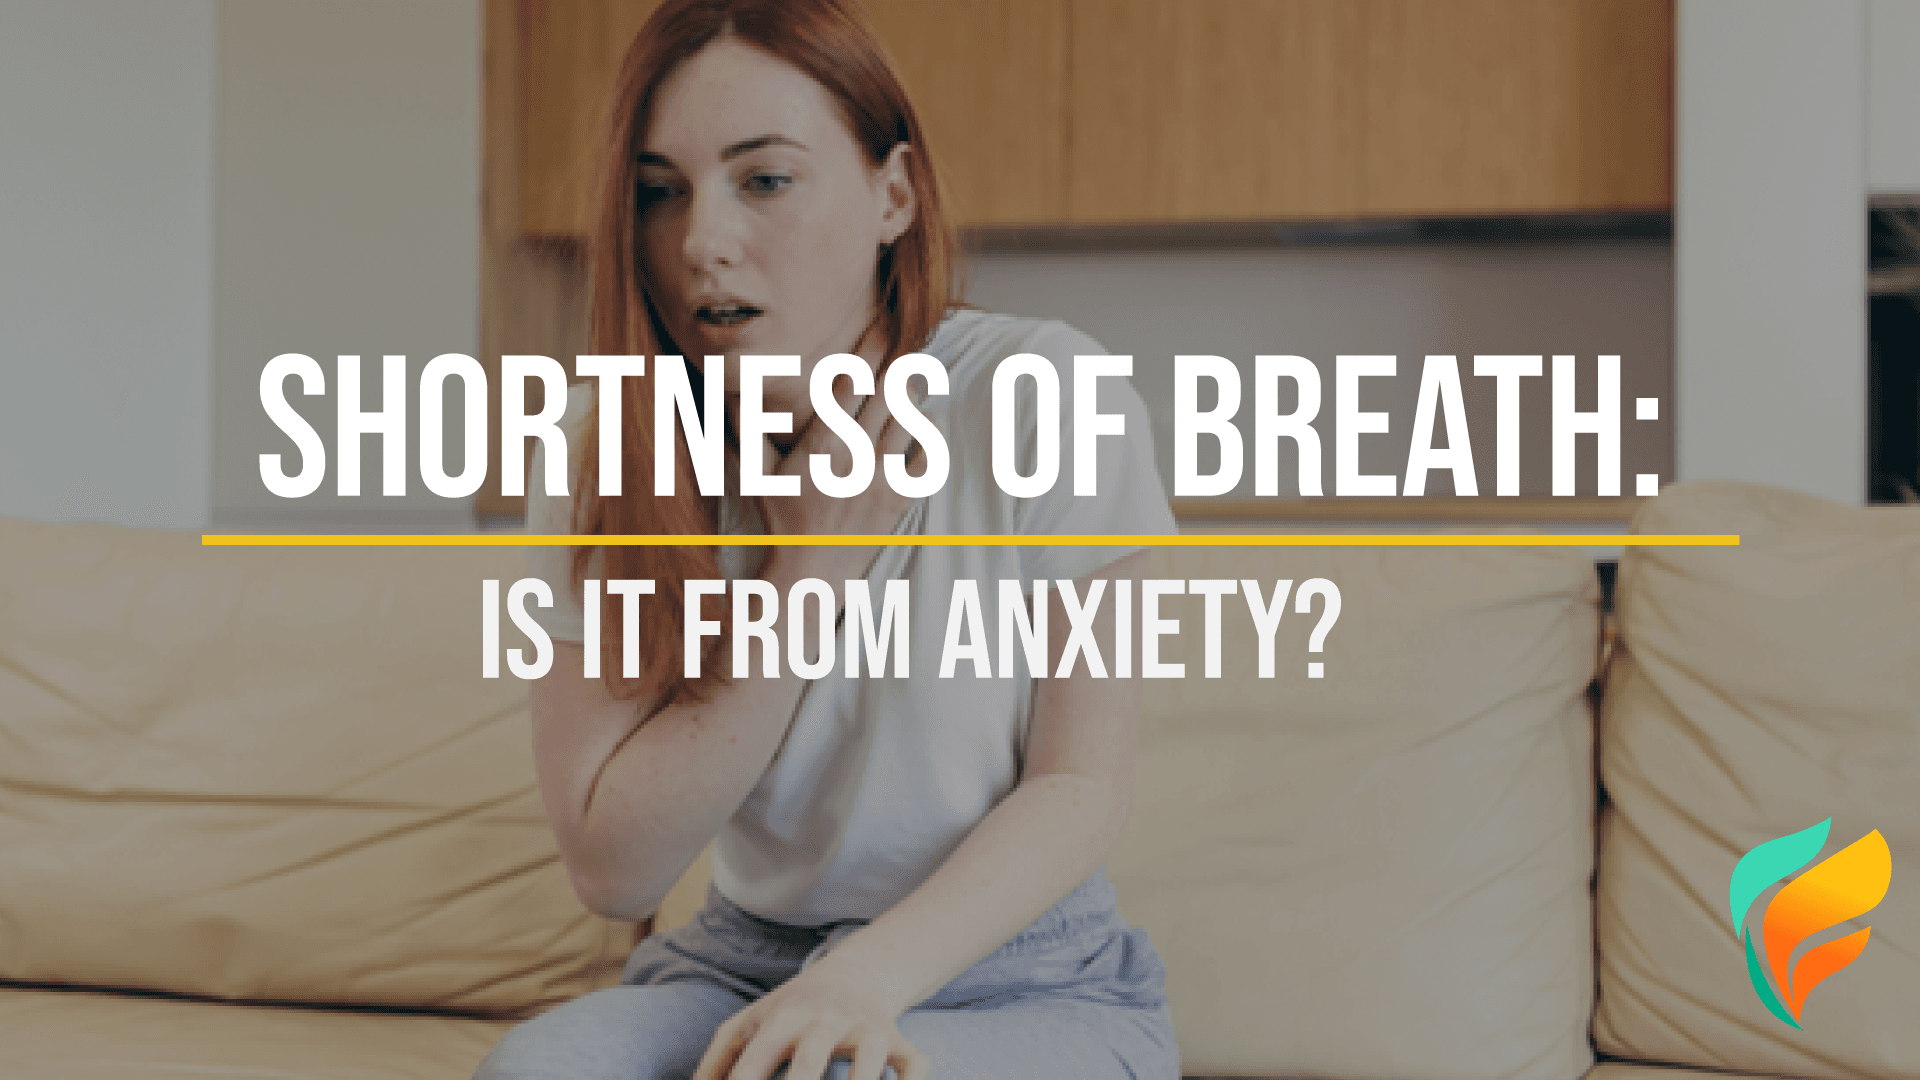 Does Anxiety Cause Shortness of Breath?